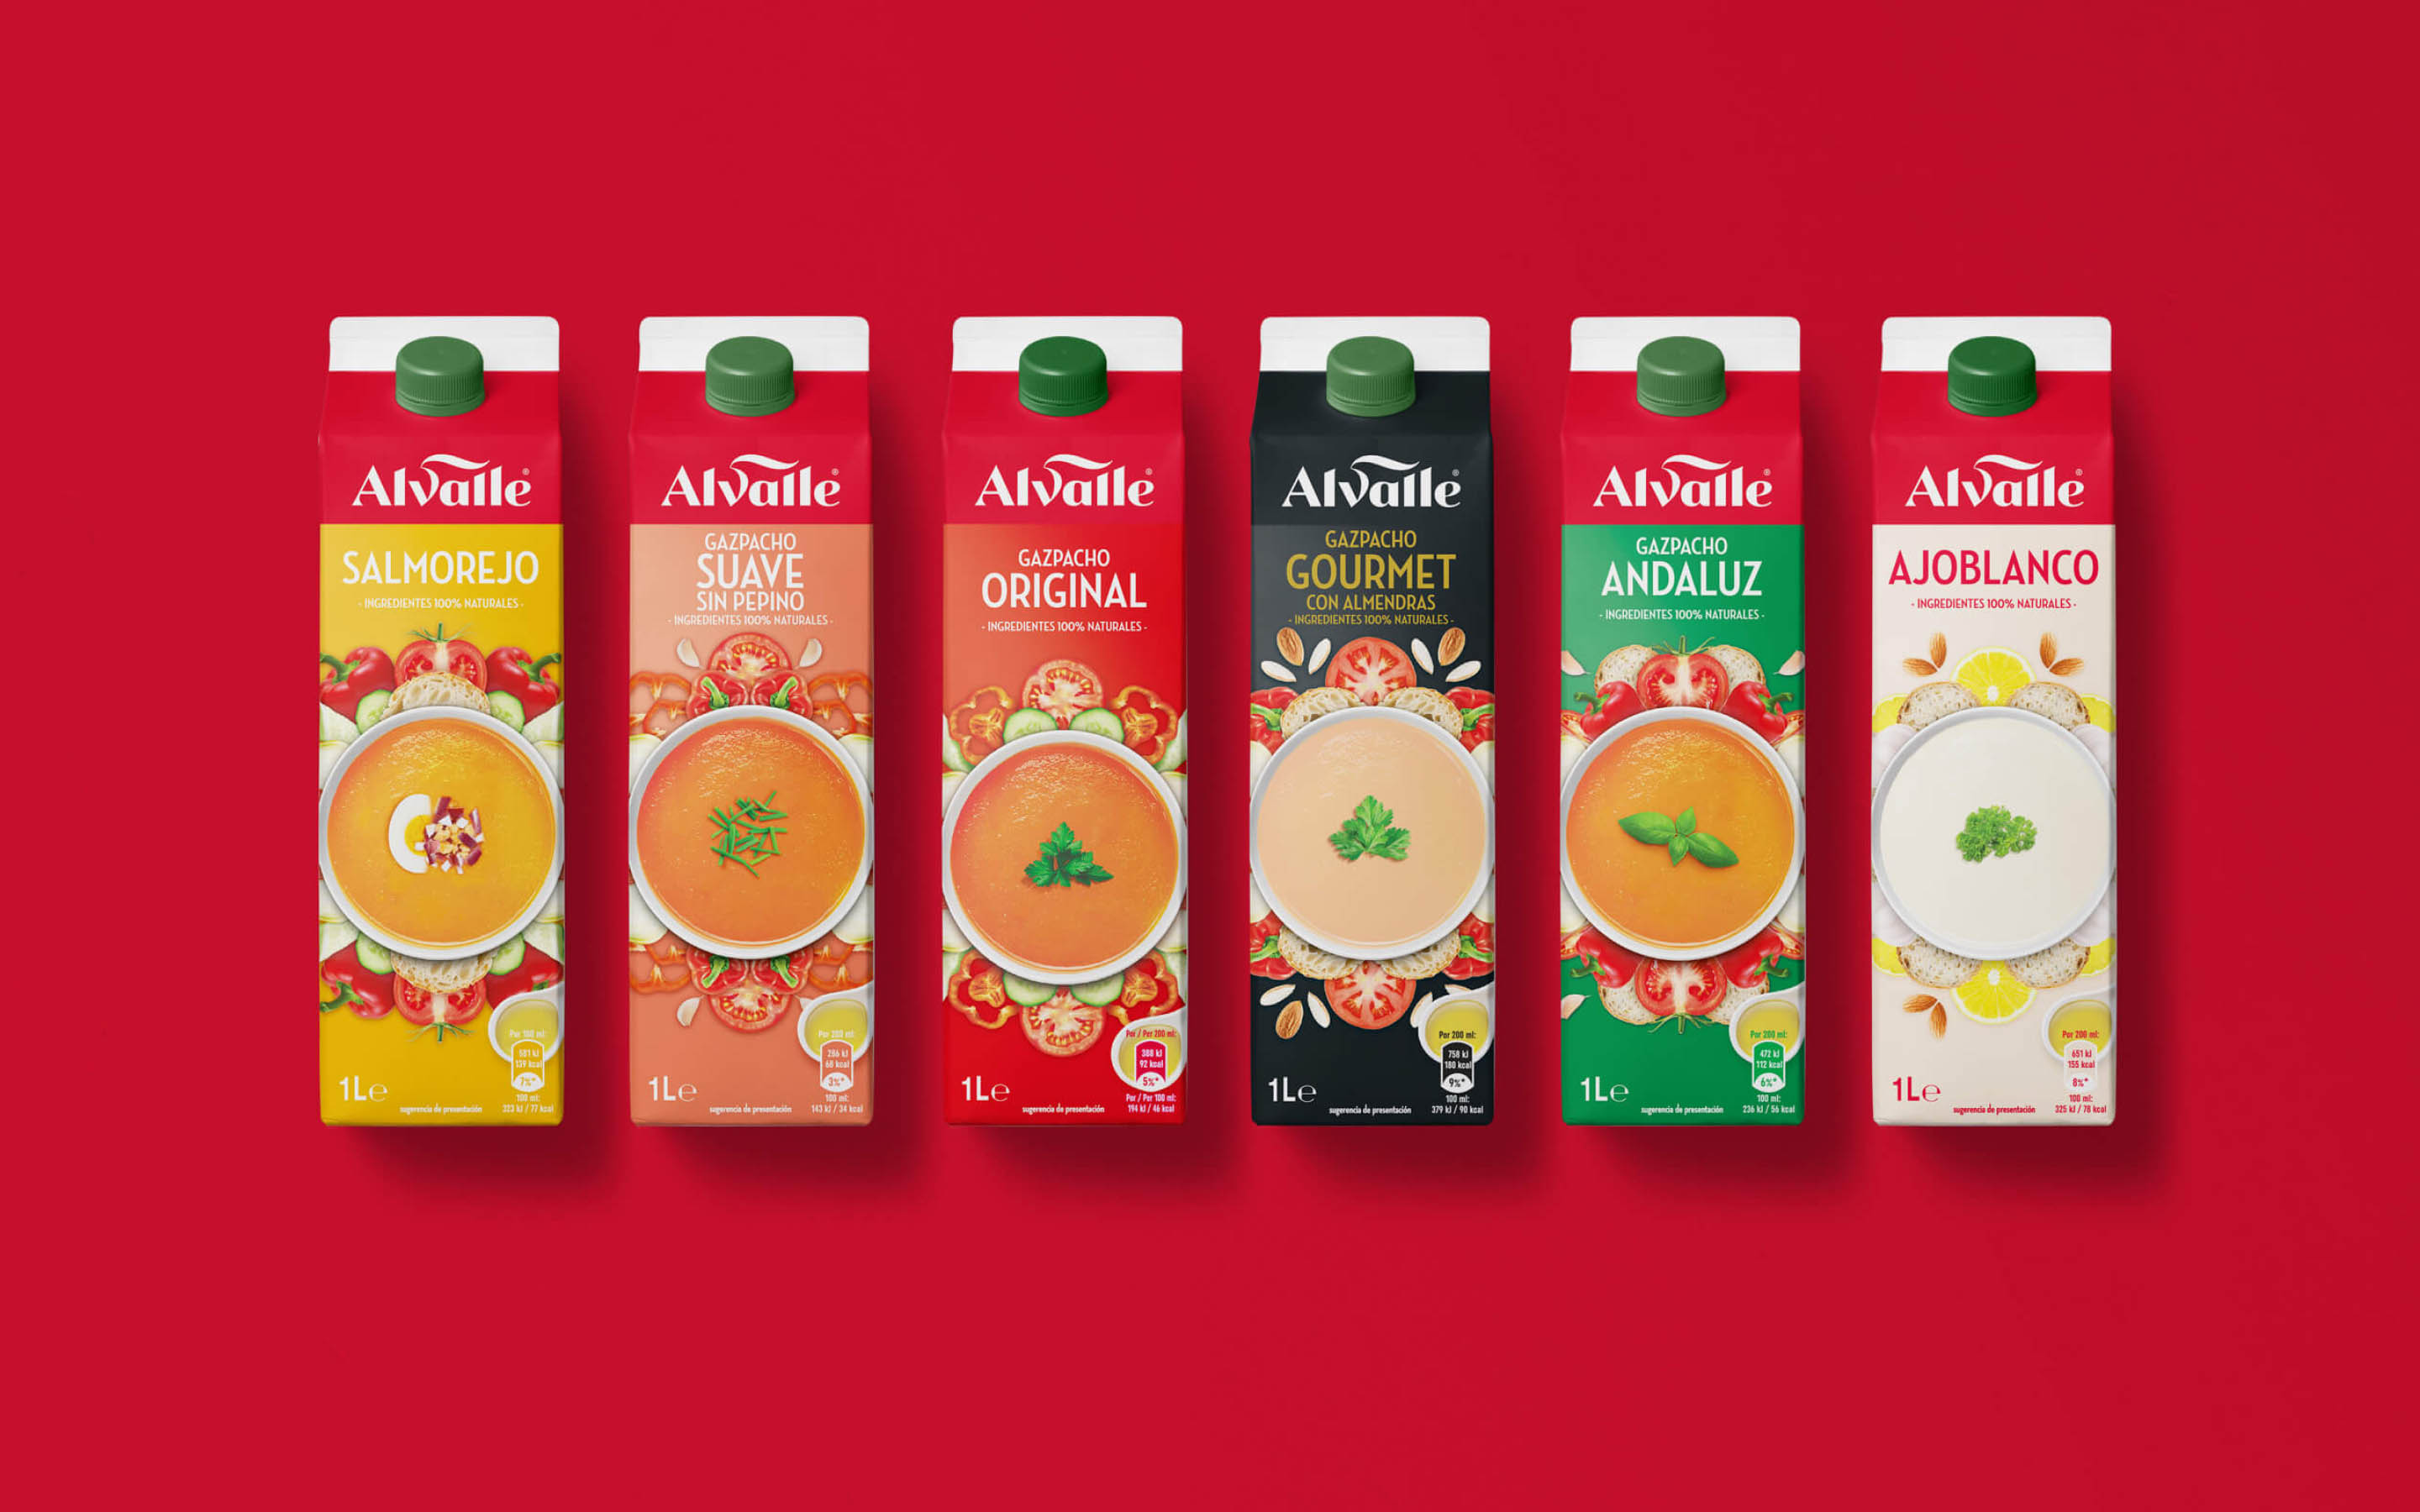 Following its successful launch in France, in 2017 PepsiCo decided to extend its iconic Alvalle Gazpacho to UK, Benelux and US markets. It was time to branch out beyond its Spanish roots and culinary tradition, and present the world with a healthy and genuine product, with a distinctive identity from the rest of players in its market of origin: Spain.
